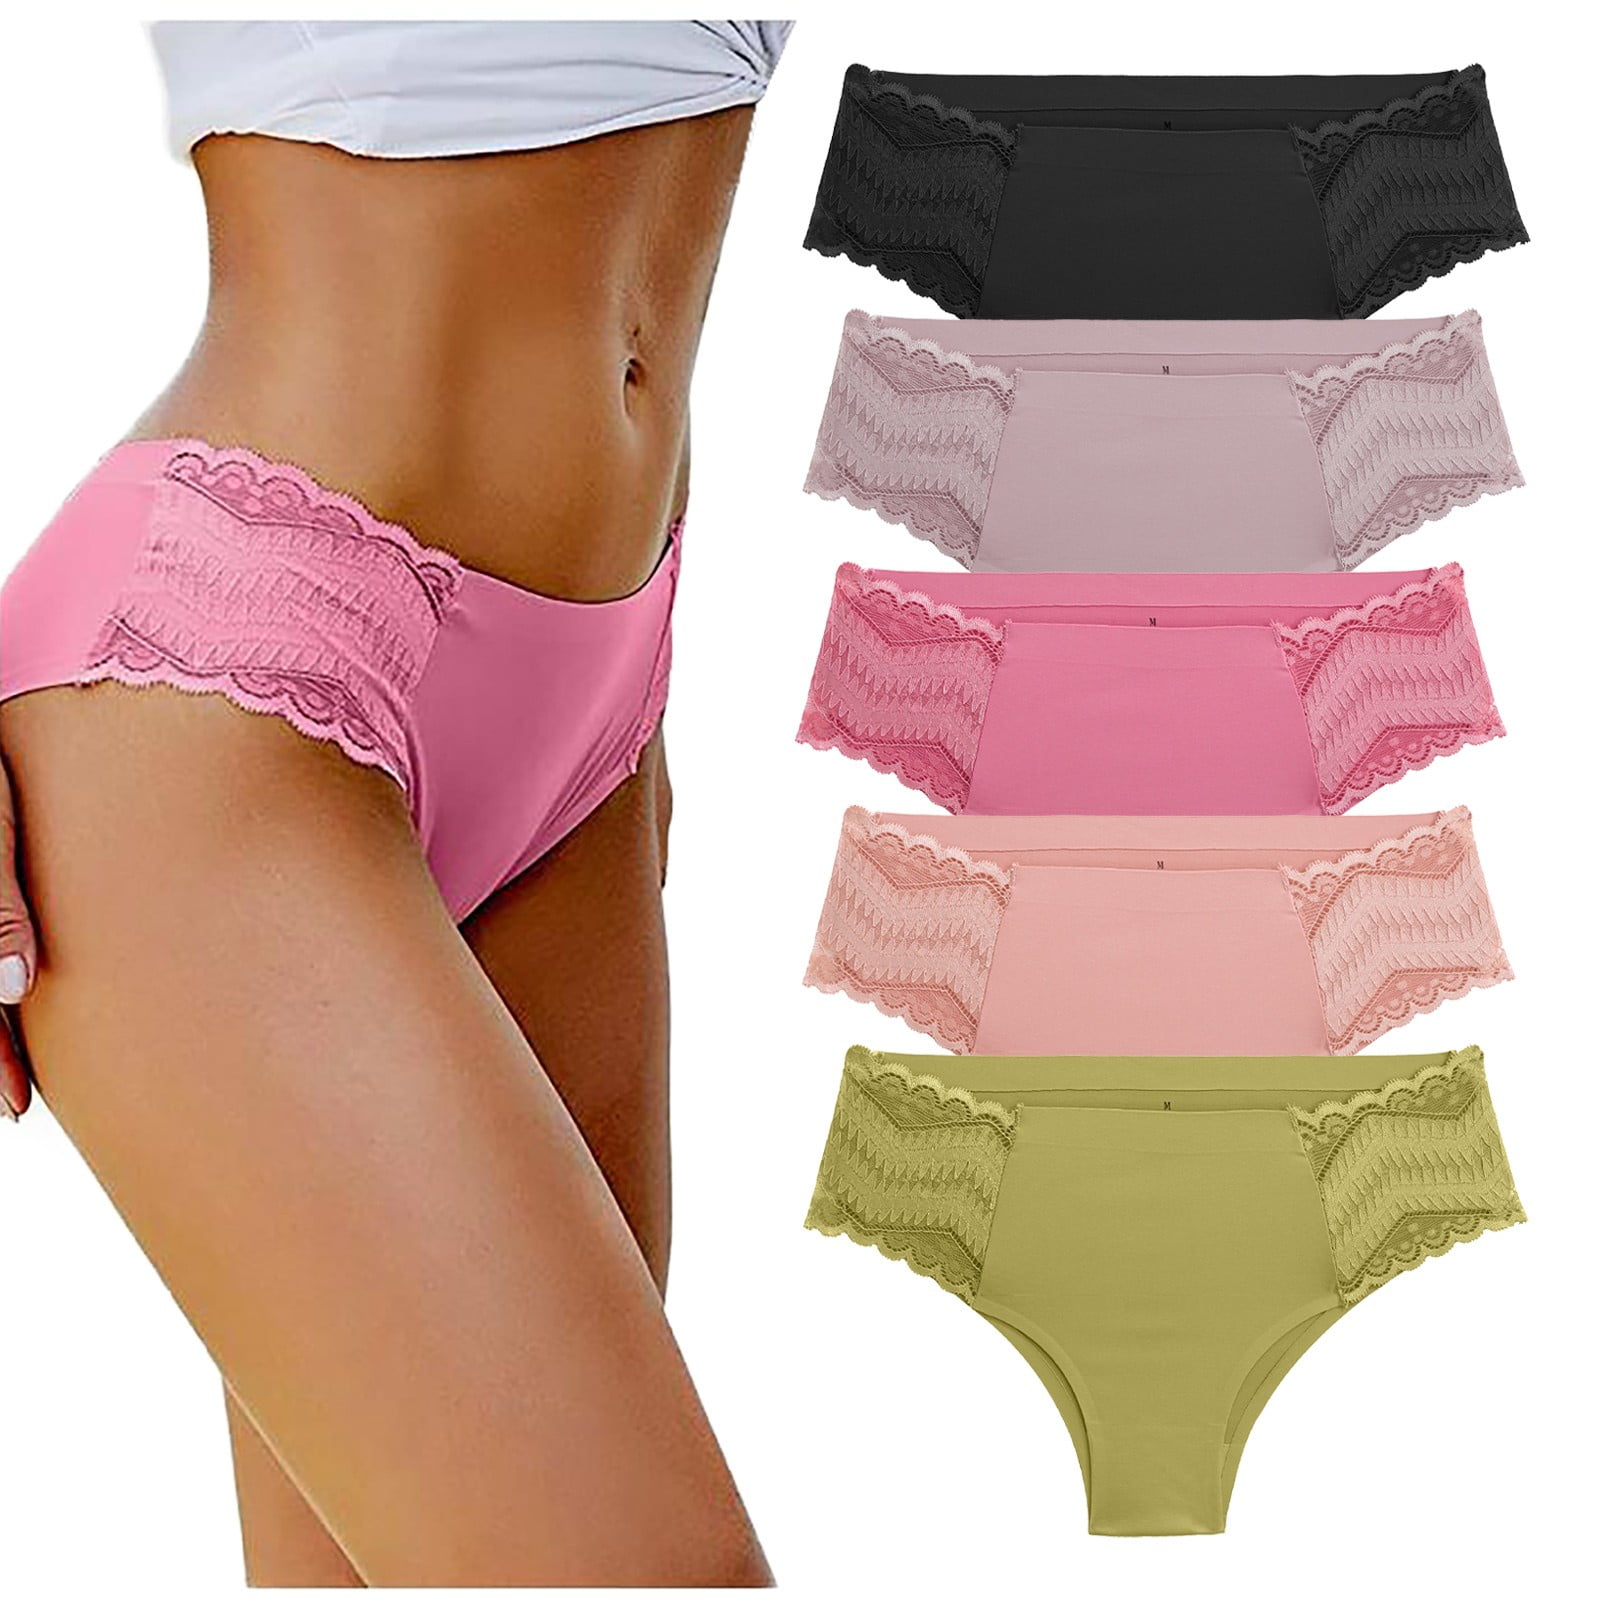 Buy Pescara Plus Size Panty for Women - Pack of 3 - Multicolor (S) at